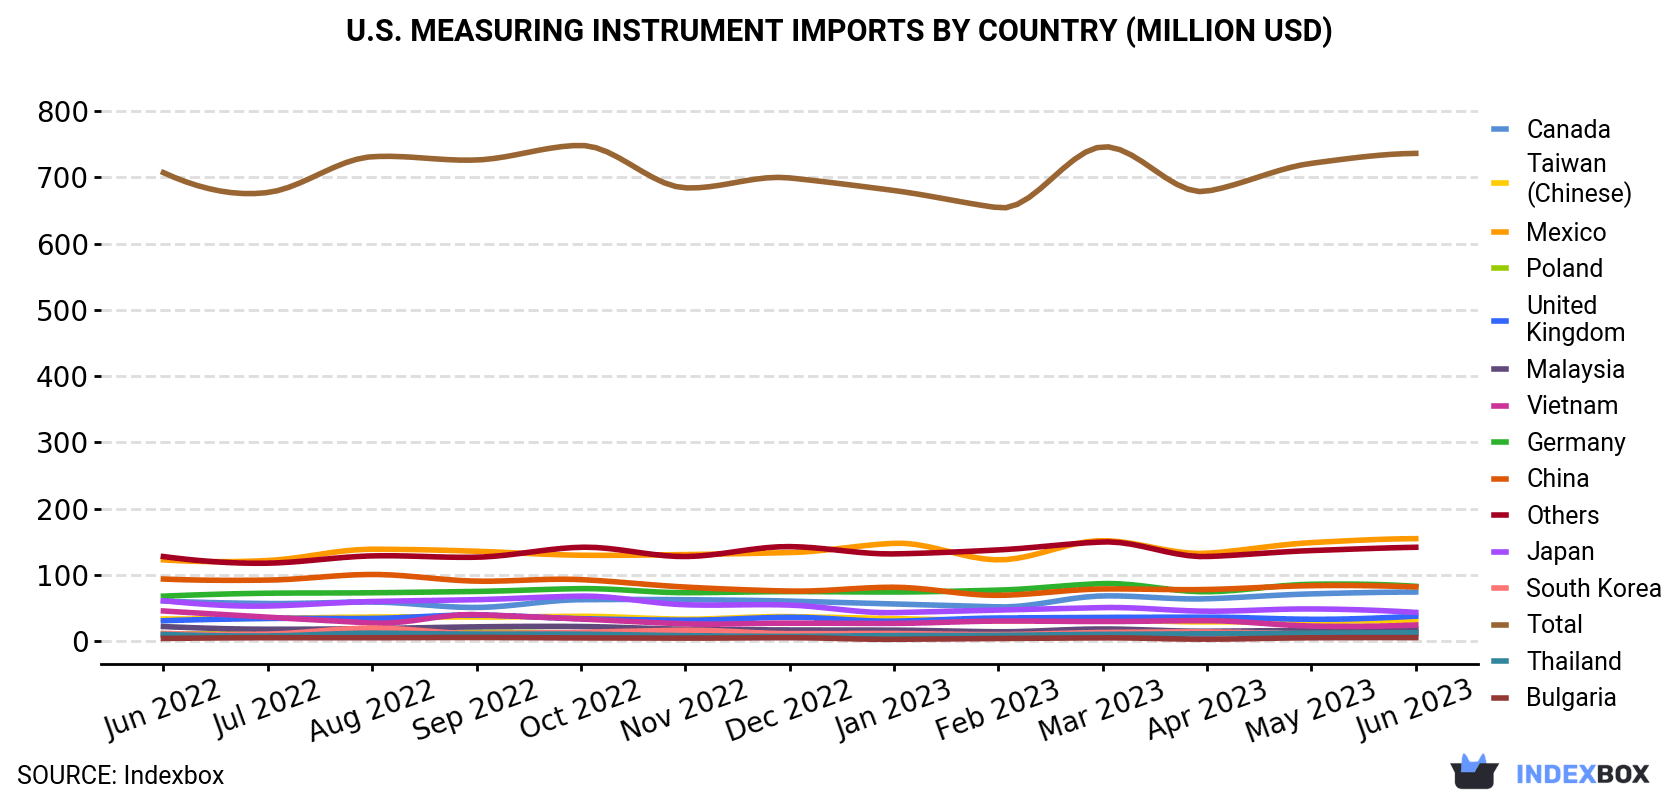 U.S. Measuring Instrument Imports By Country (Million USD)